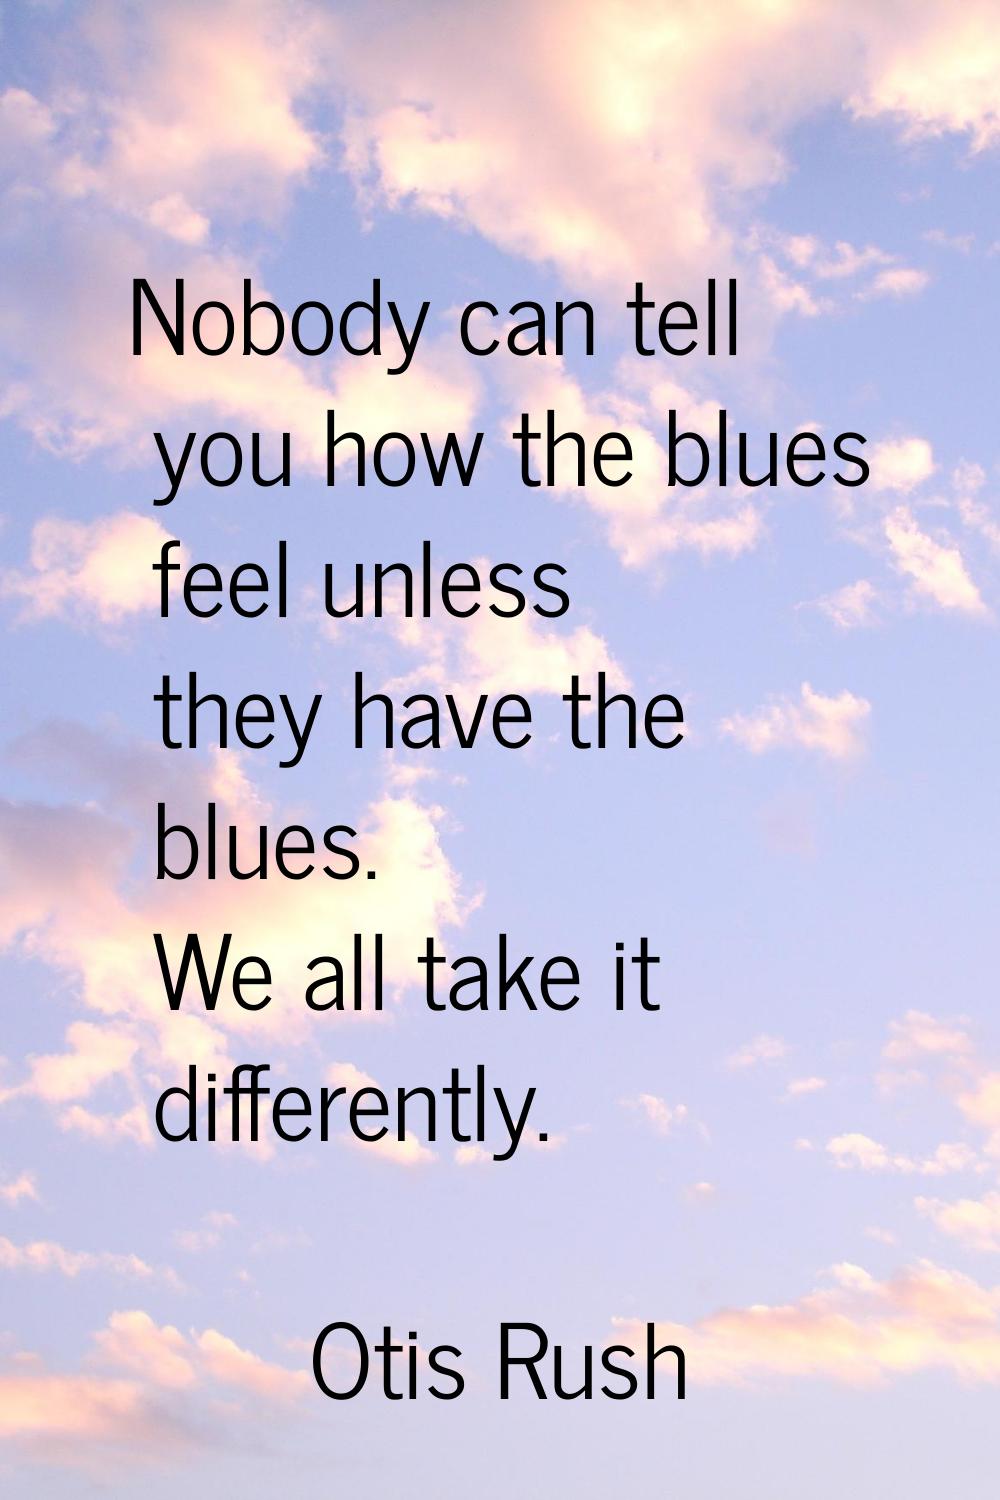 Nobody can tell you how the blues feel unless they have the blues. We all take it differently.